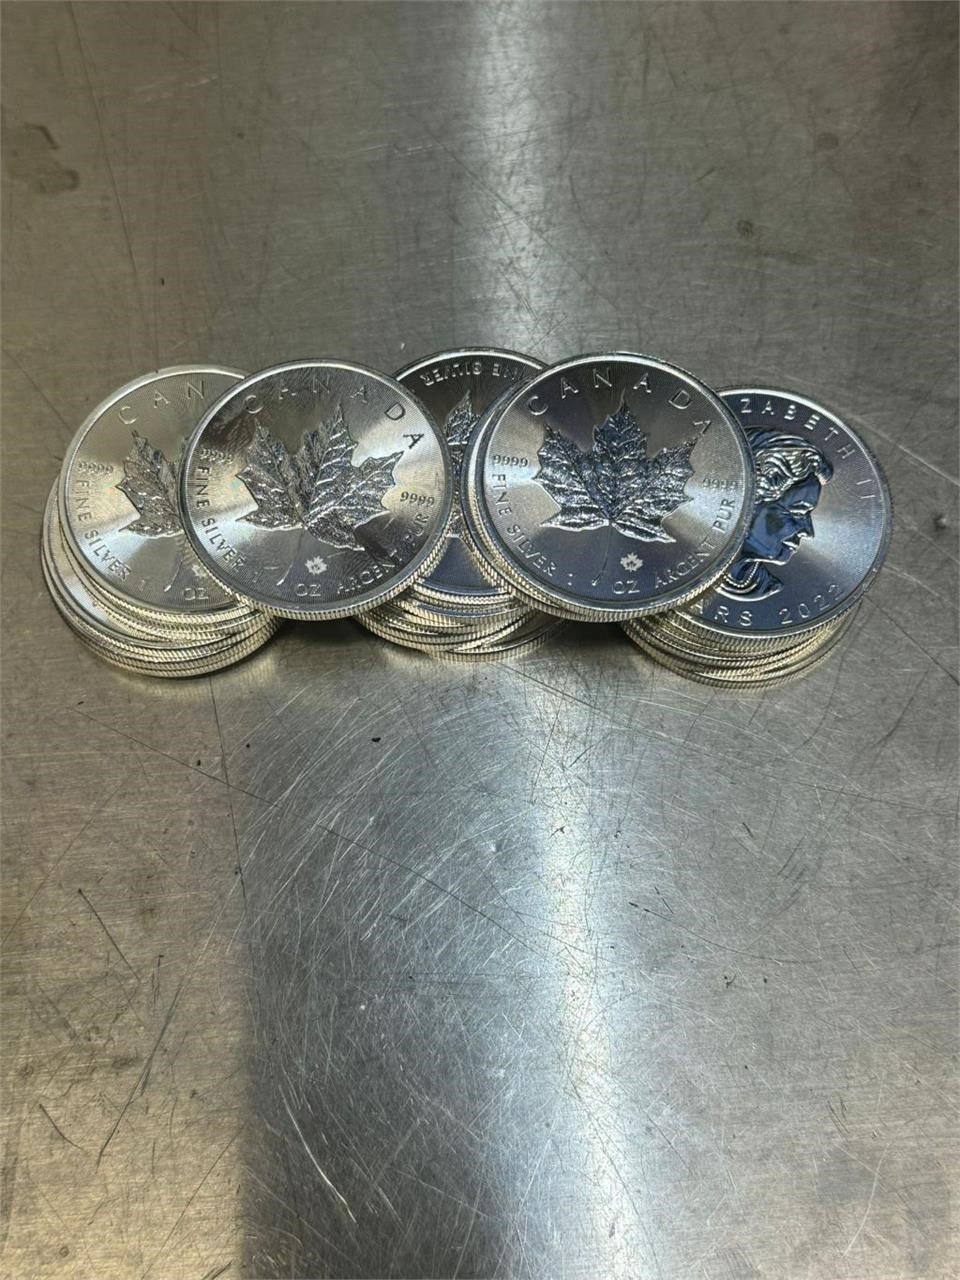 mapleleafe silver coins 2